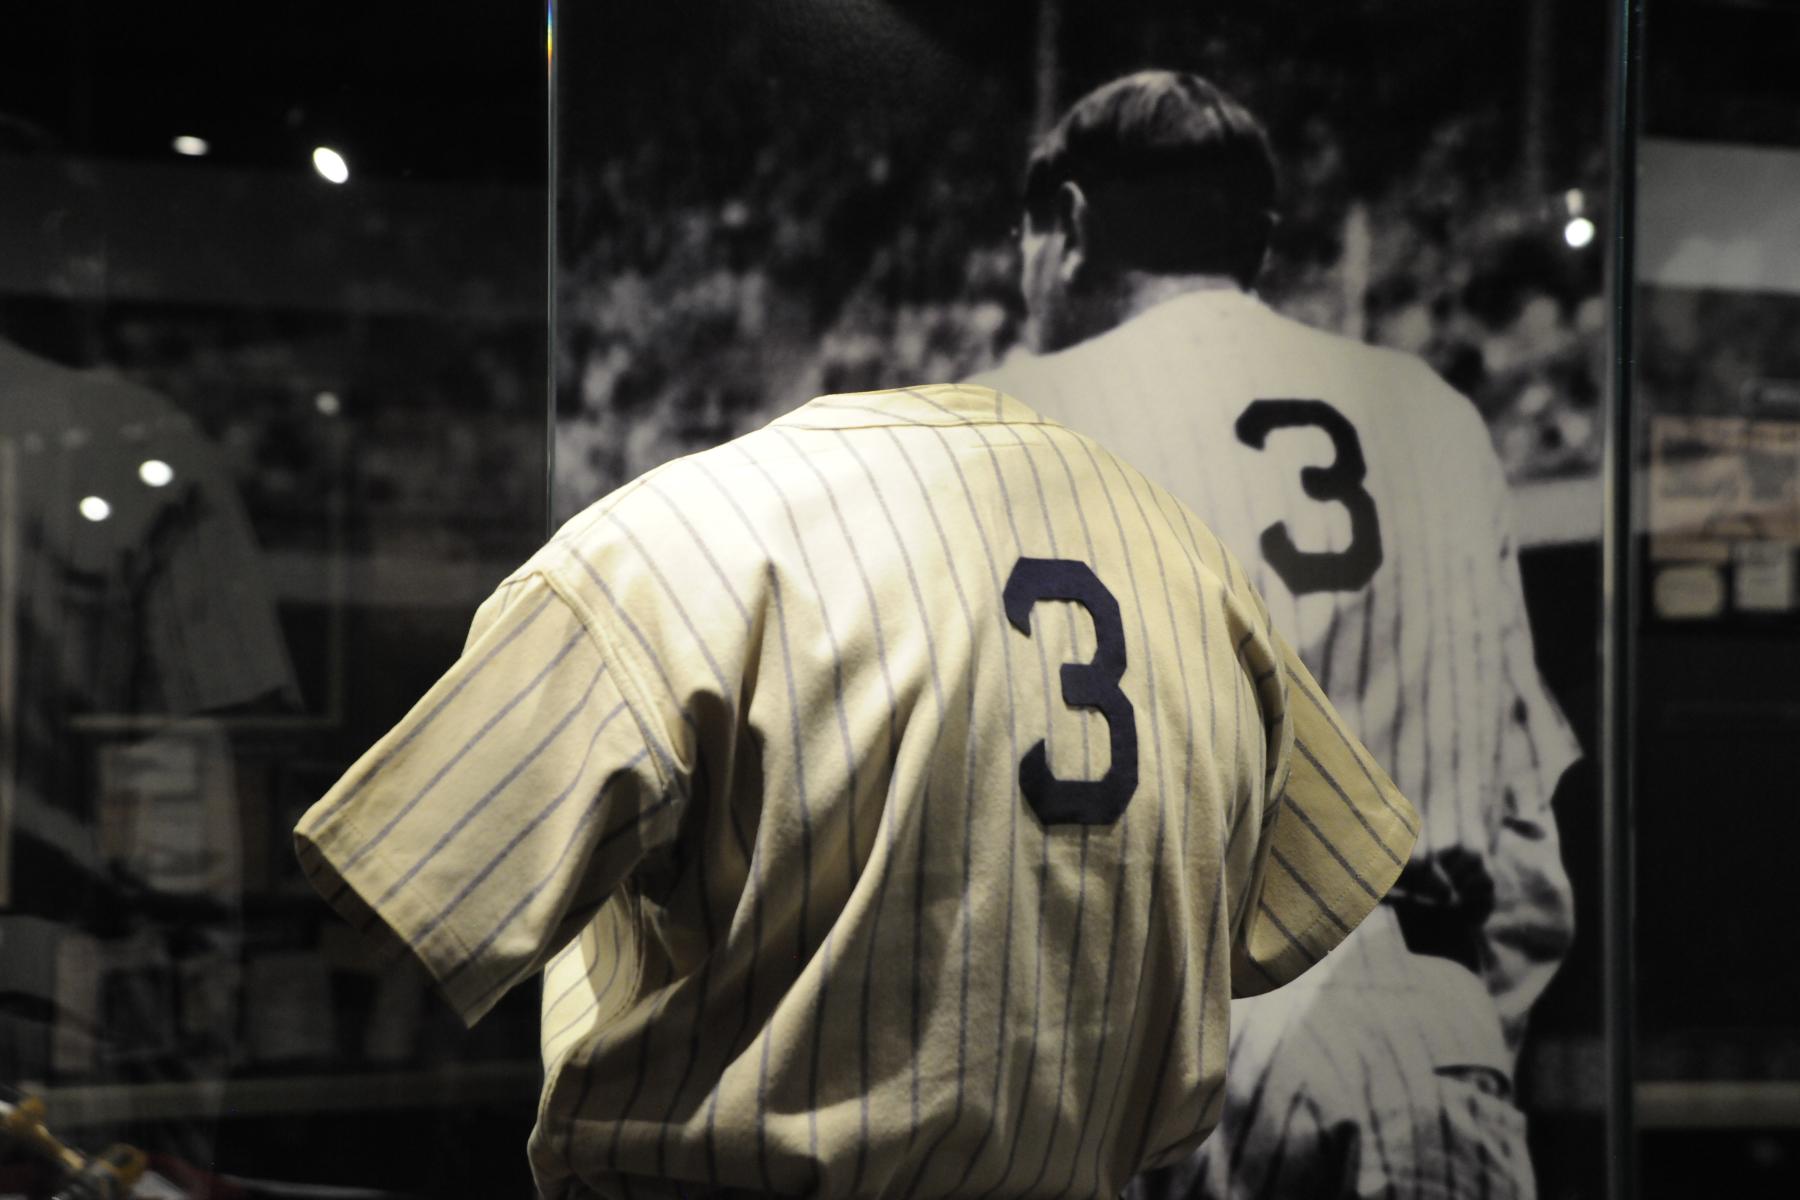 Babe Ruth's jersey on display at the Yankee museum.